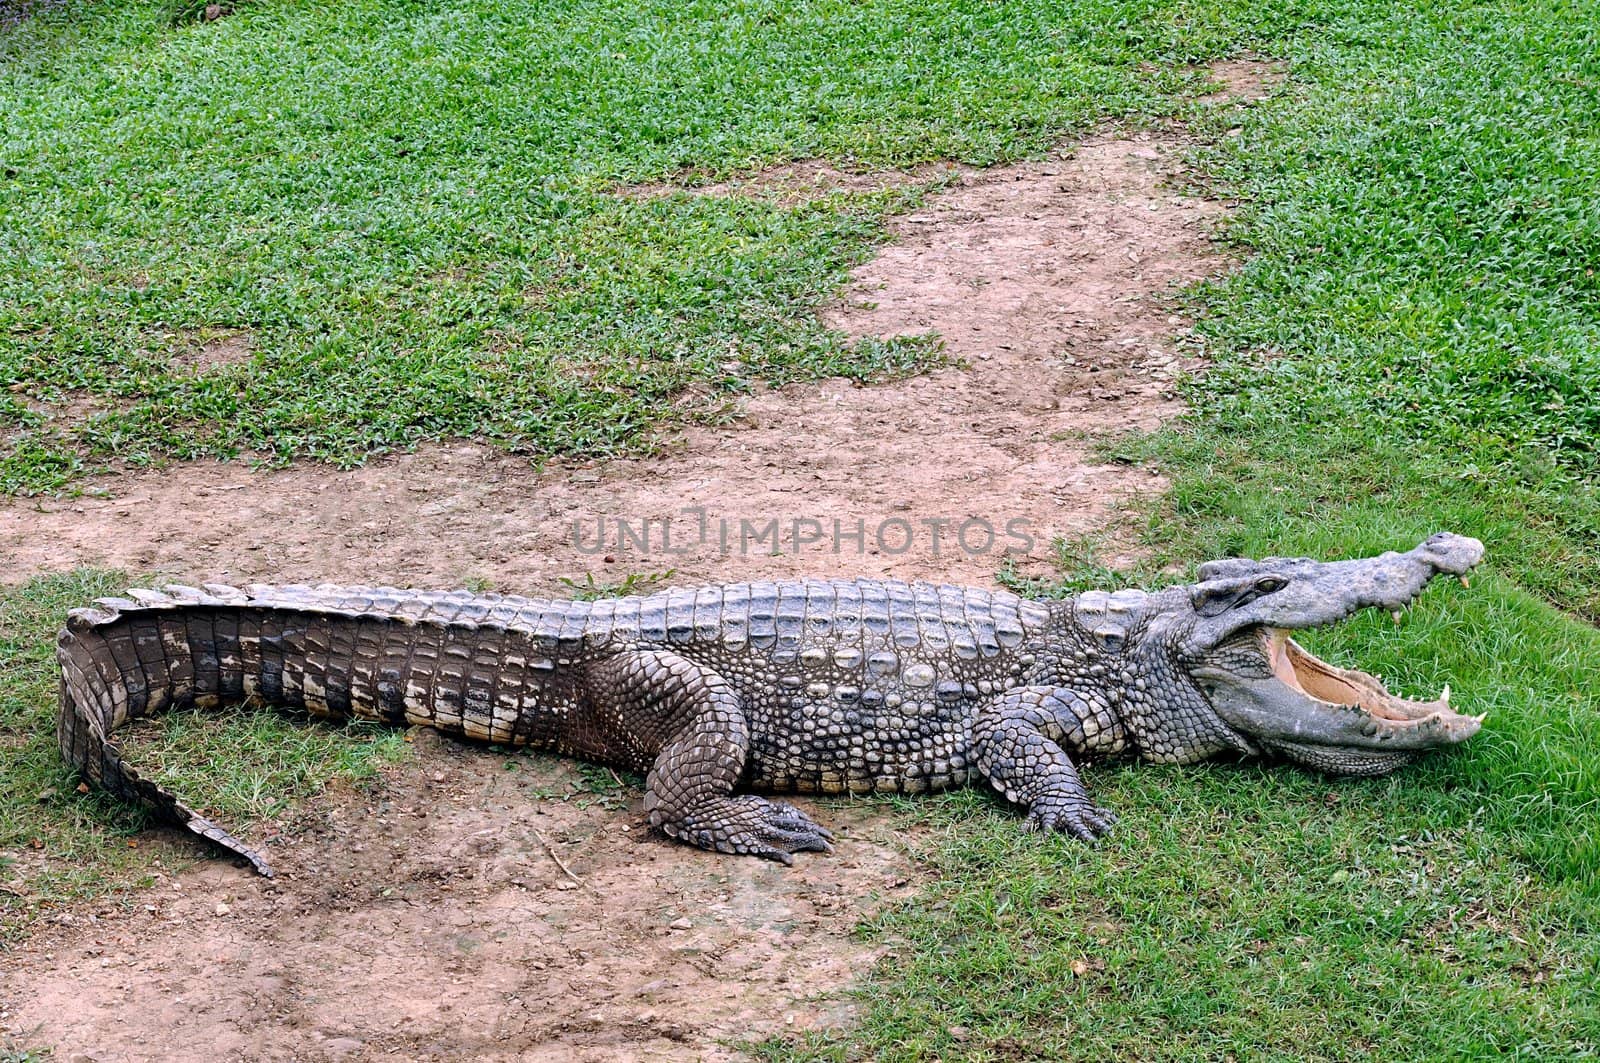 rocodile with open mouth at side of water on grass.